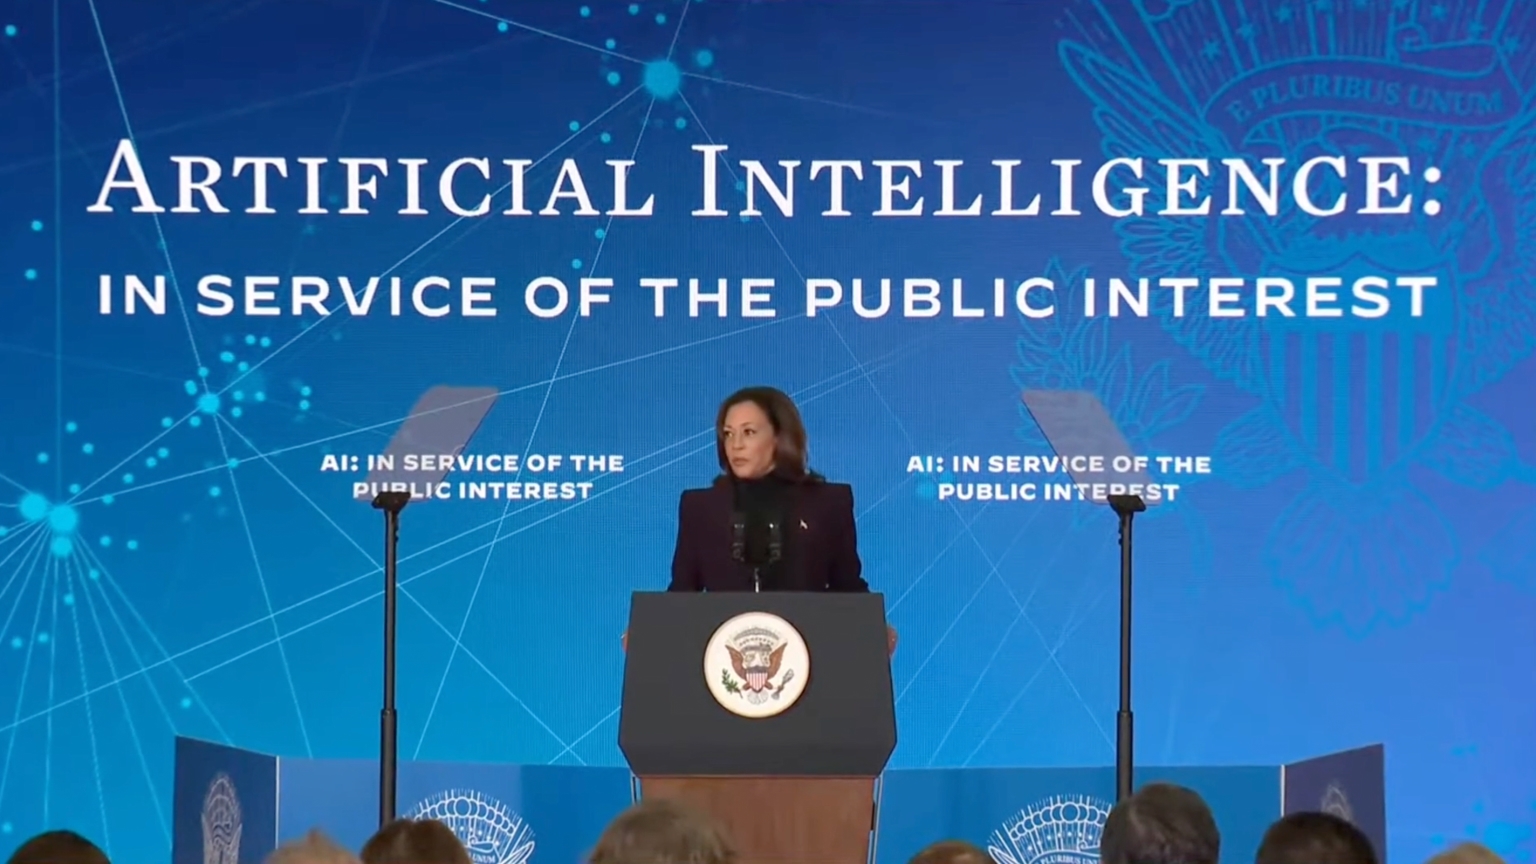 VP Kamala Harris Suggests “AI-Enabled Mis- and Disinformation” Is an “Existential” Threat to Democracy